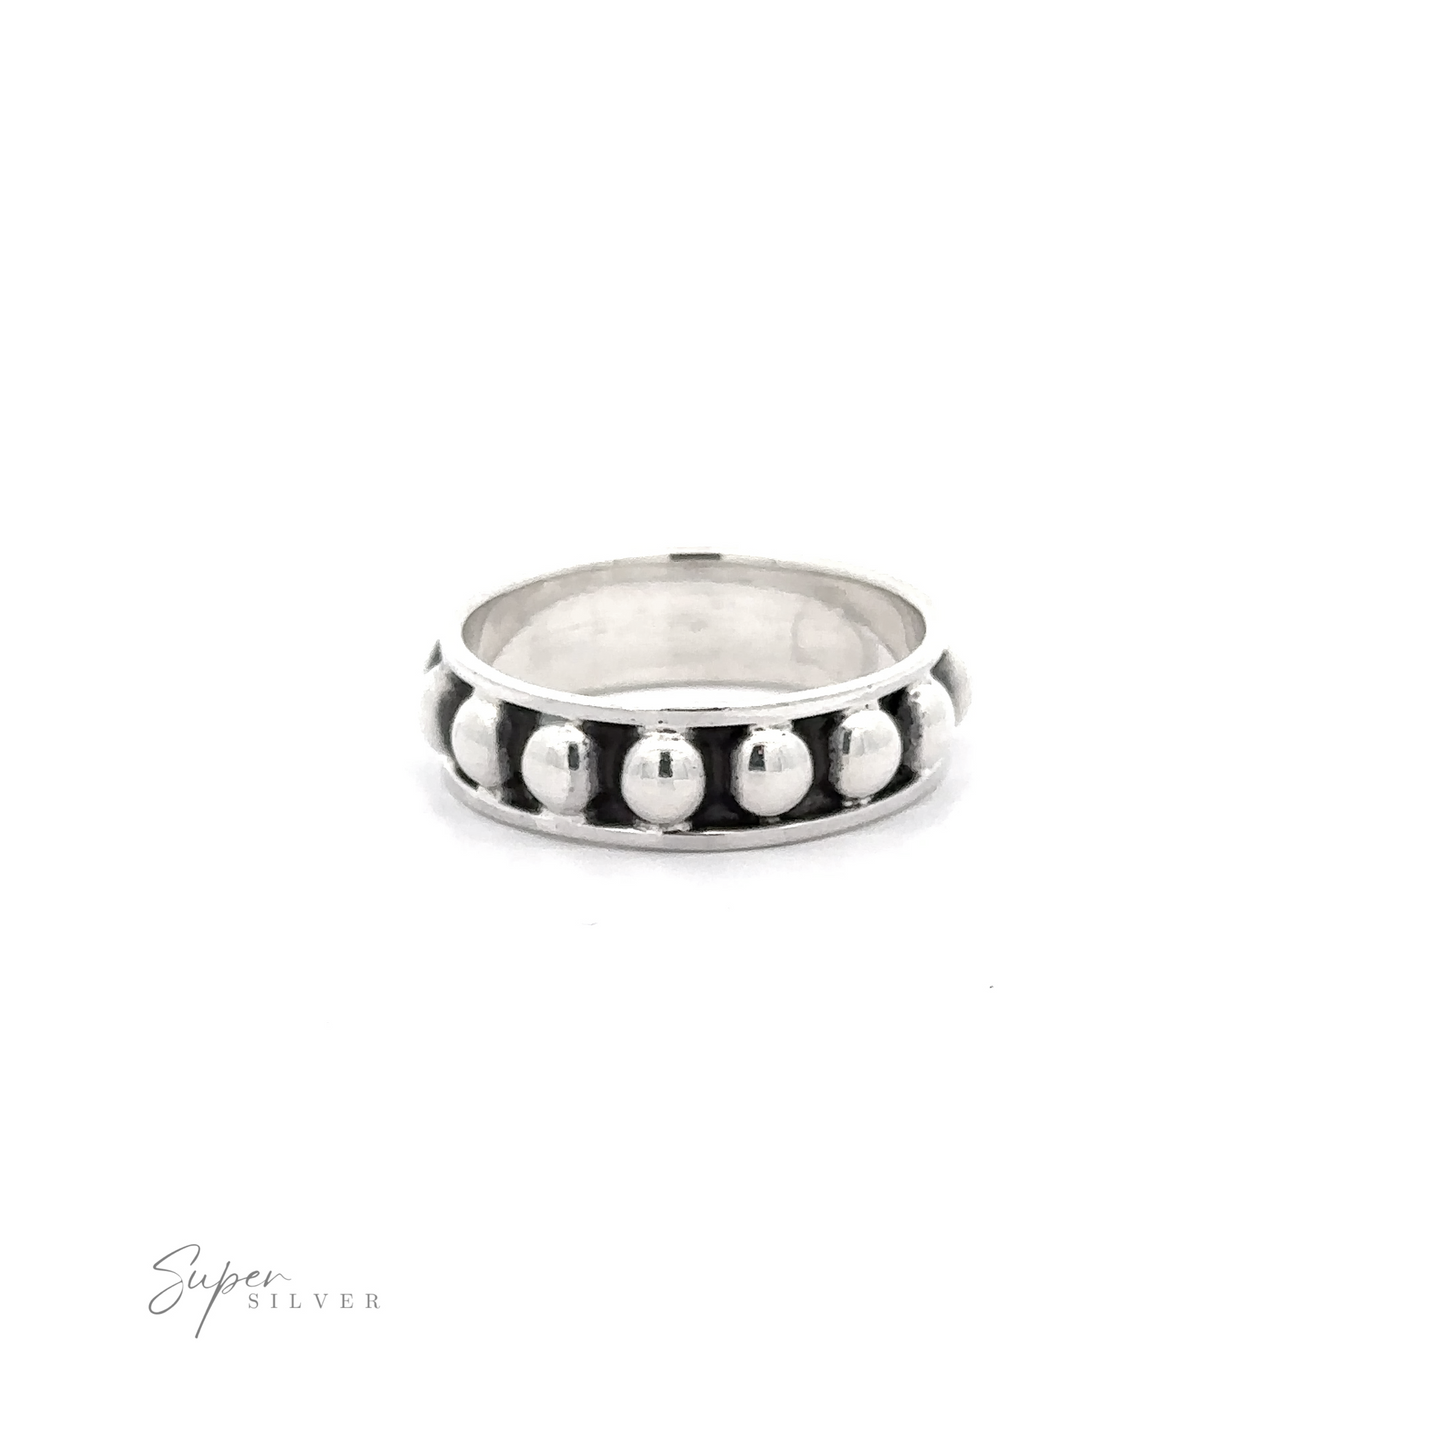 Sentence with product name: Silver ring featuring a Thick Oxidized Ball Band with a row of spherical beads, set against a plain white background.